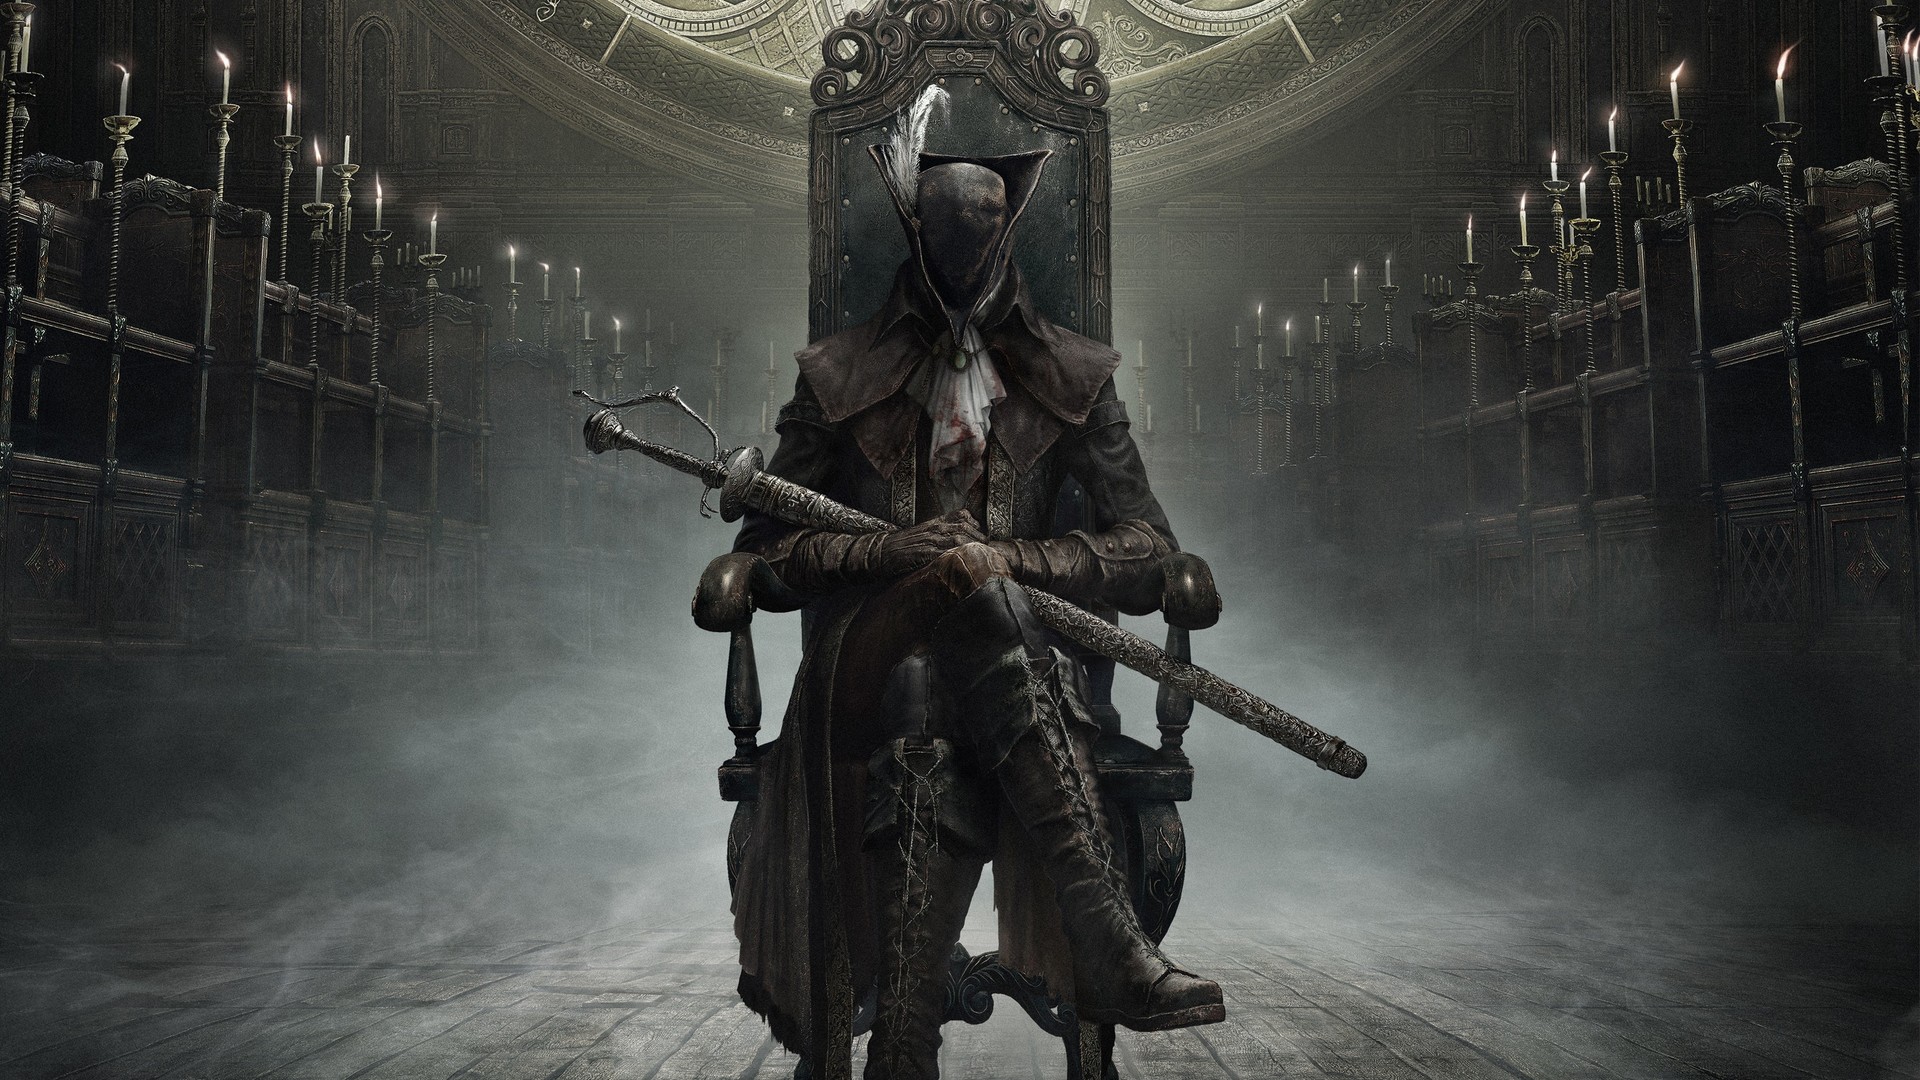 Bloodborne comes to PC, sort of, with PlayStation Now